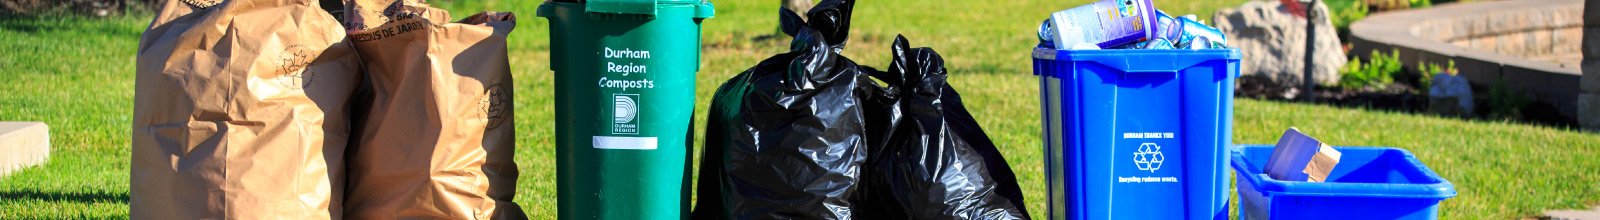 Garbage, recycling, and yard waste at the curb